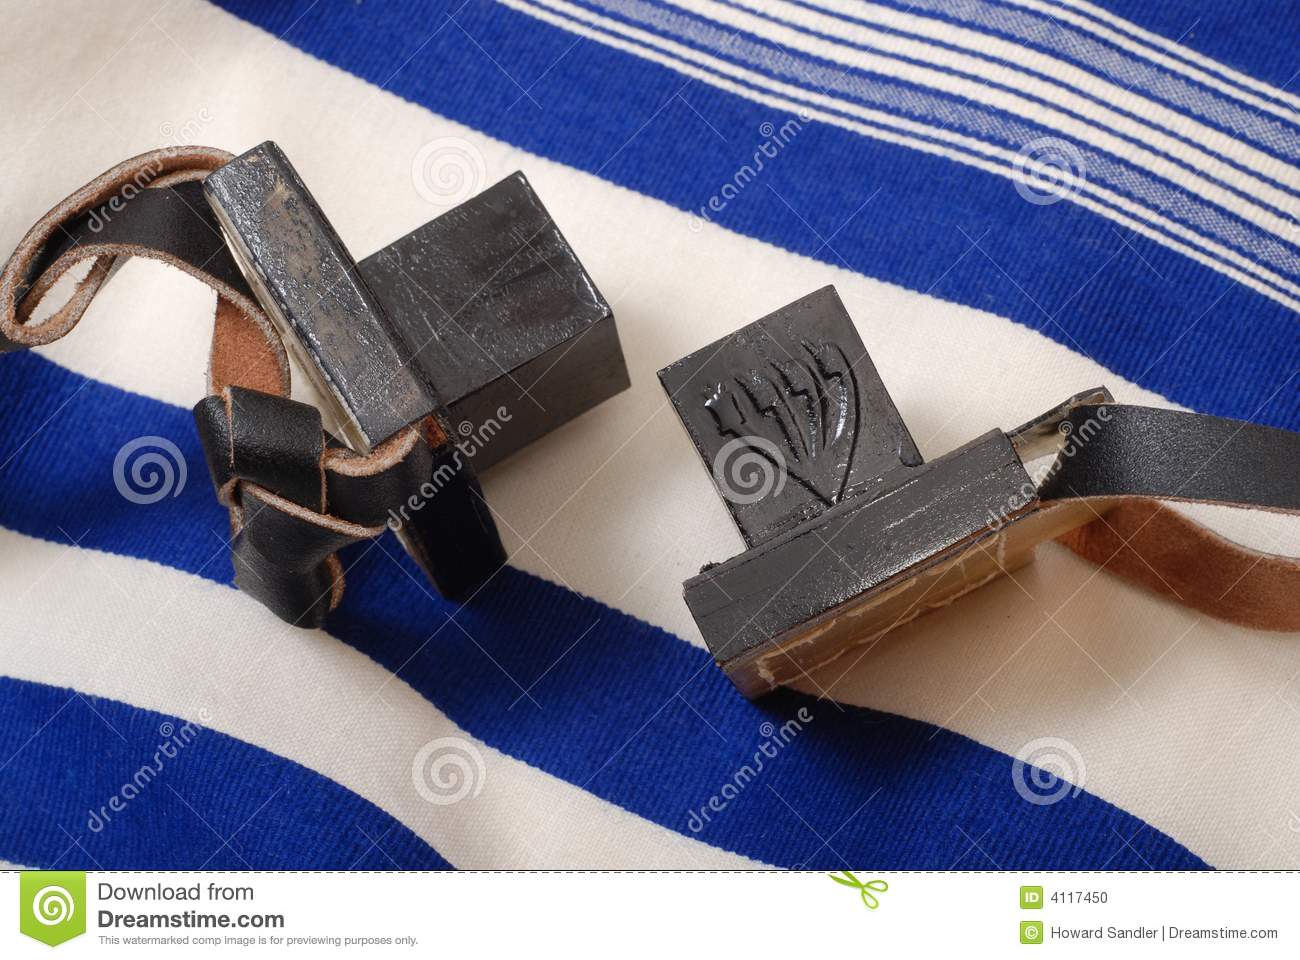 Tefillin  Phylacteries  Worn By Jewish Men For Morning Prayers  On